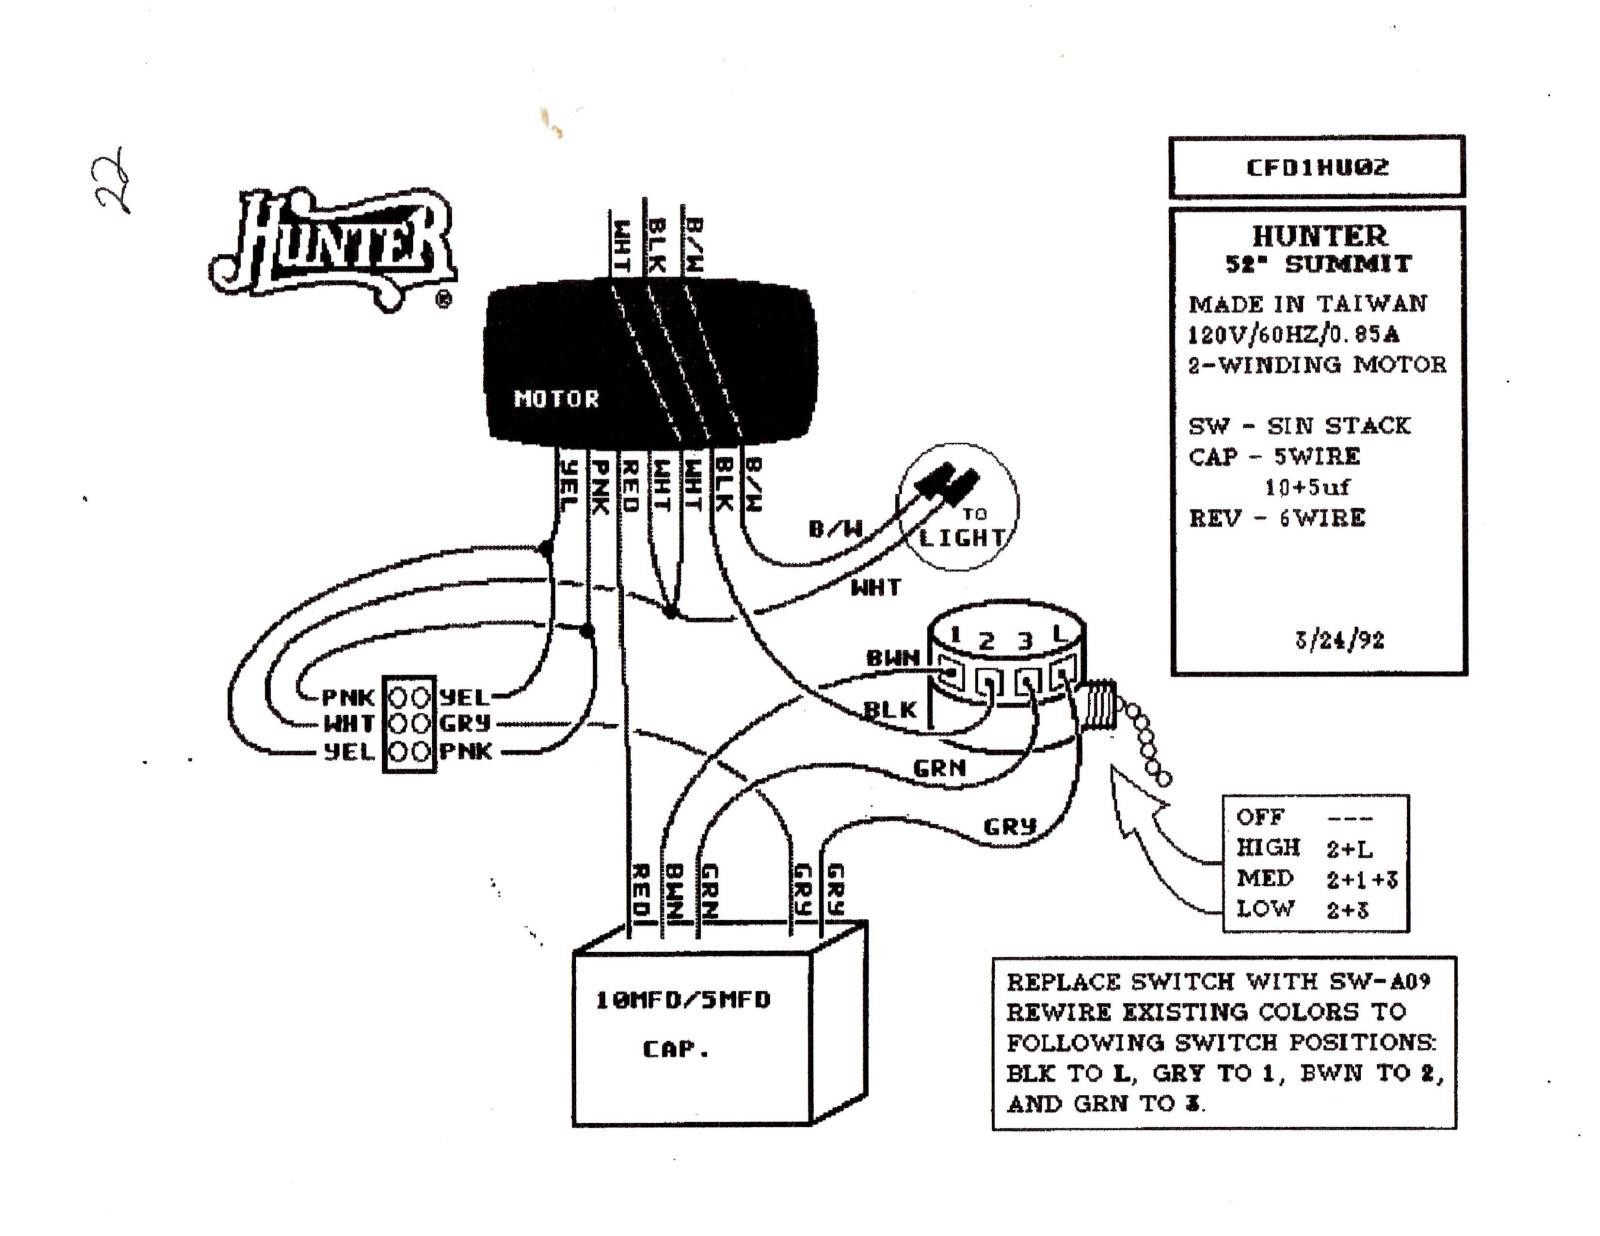 Fan Switch Wiring Diagram Hunter 3 Speed Fan Control and Light Dimmer Wiring Diagram Collection Of Fan Switch Wiring Diagram